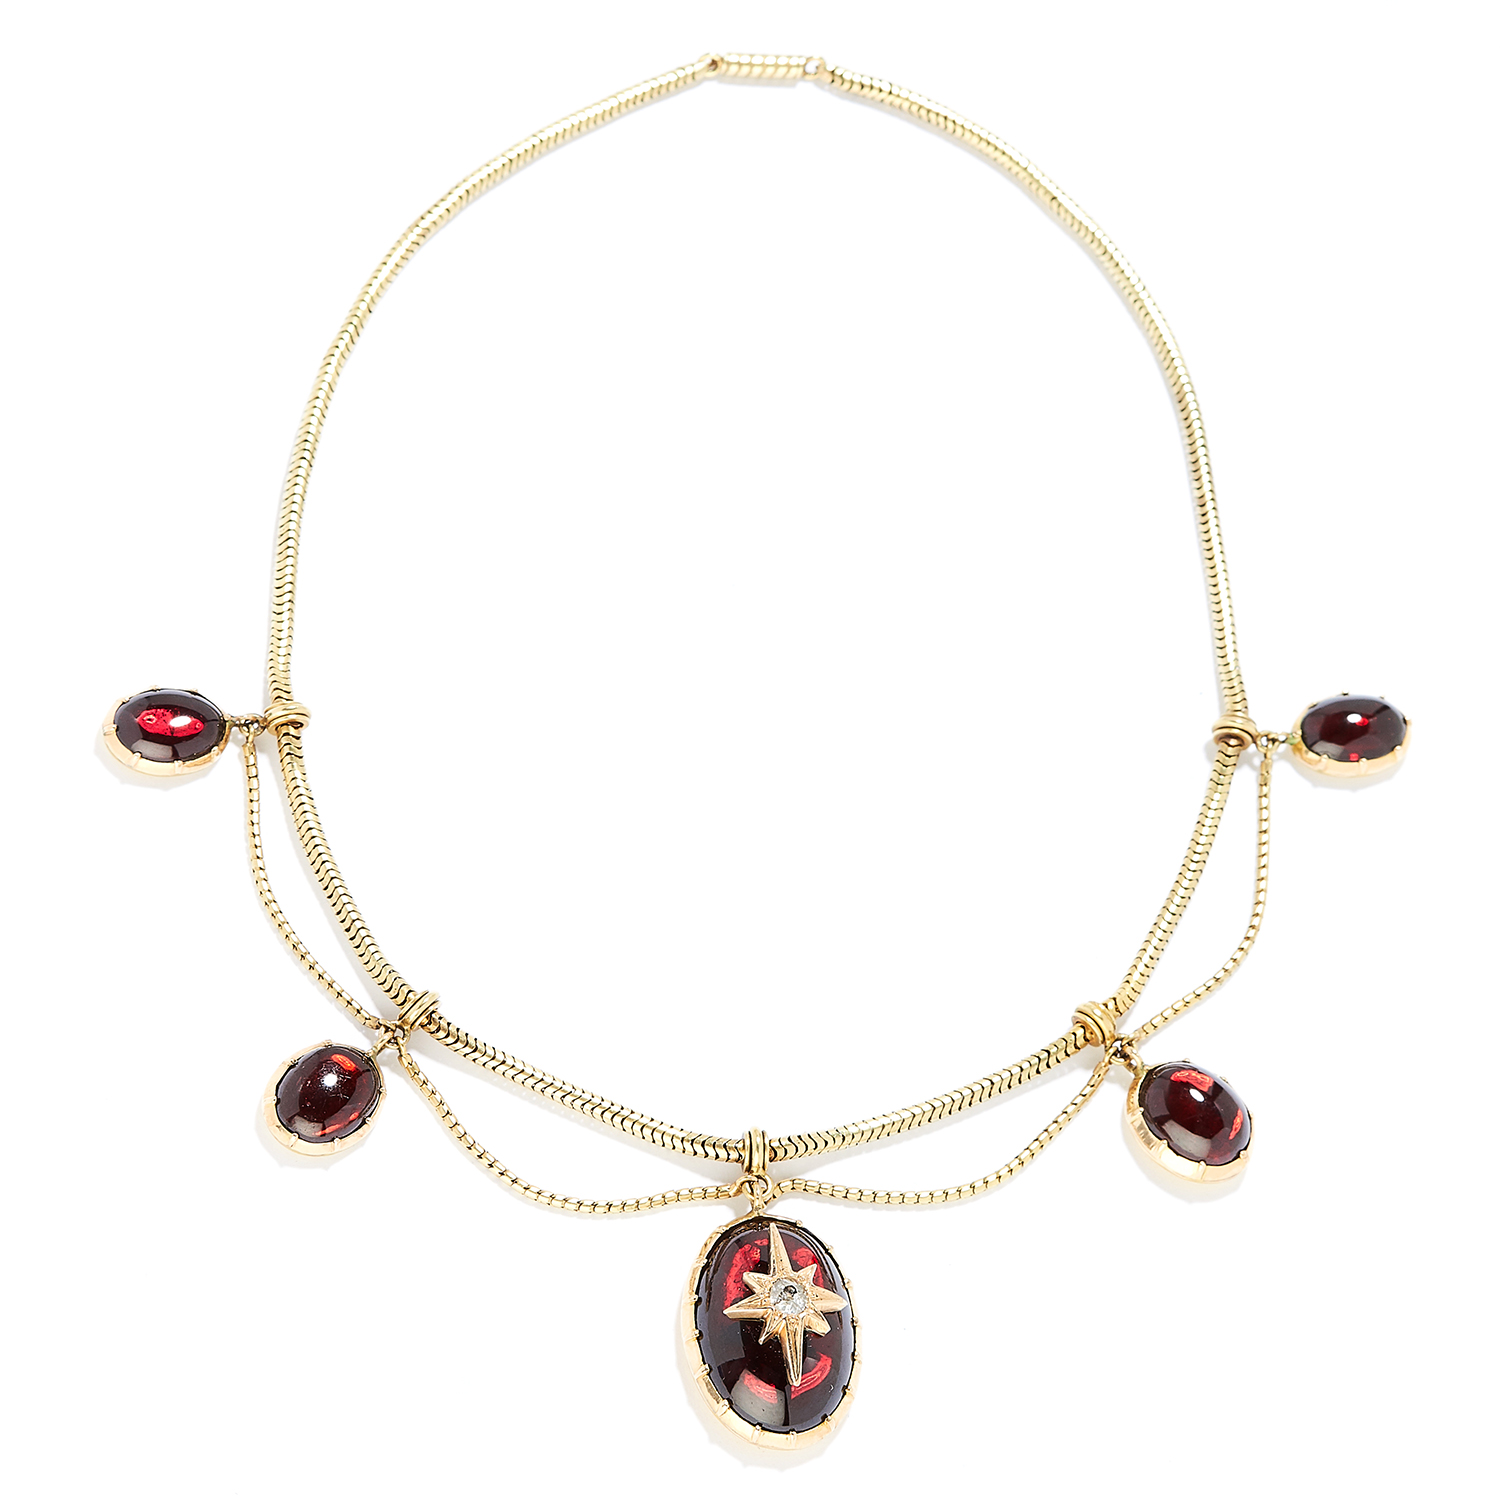 ANTIQUE DIAMOND AND GARNET NECKLACE, 19TH CENTURY in high carat yellow gold, the articulated snake